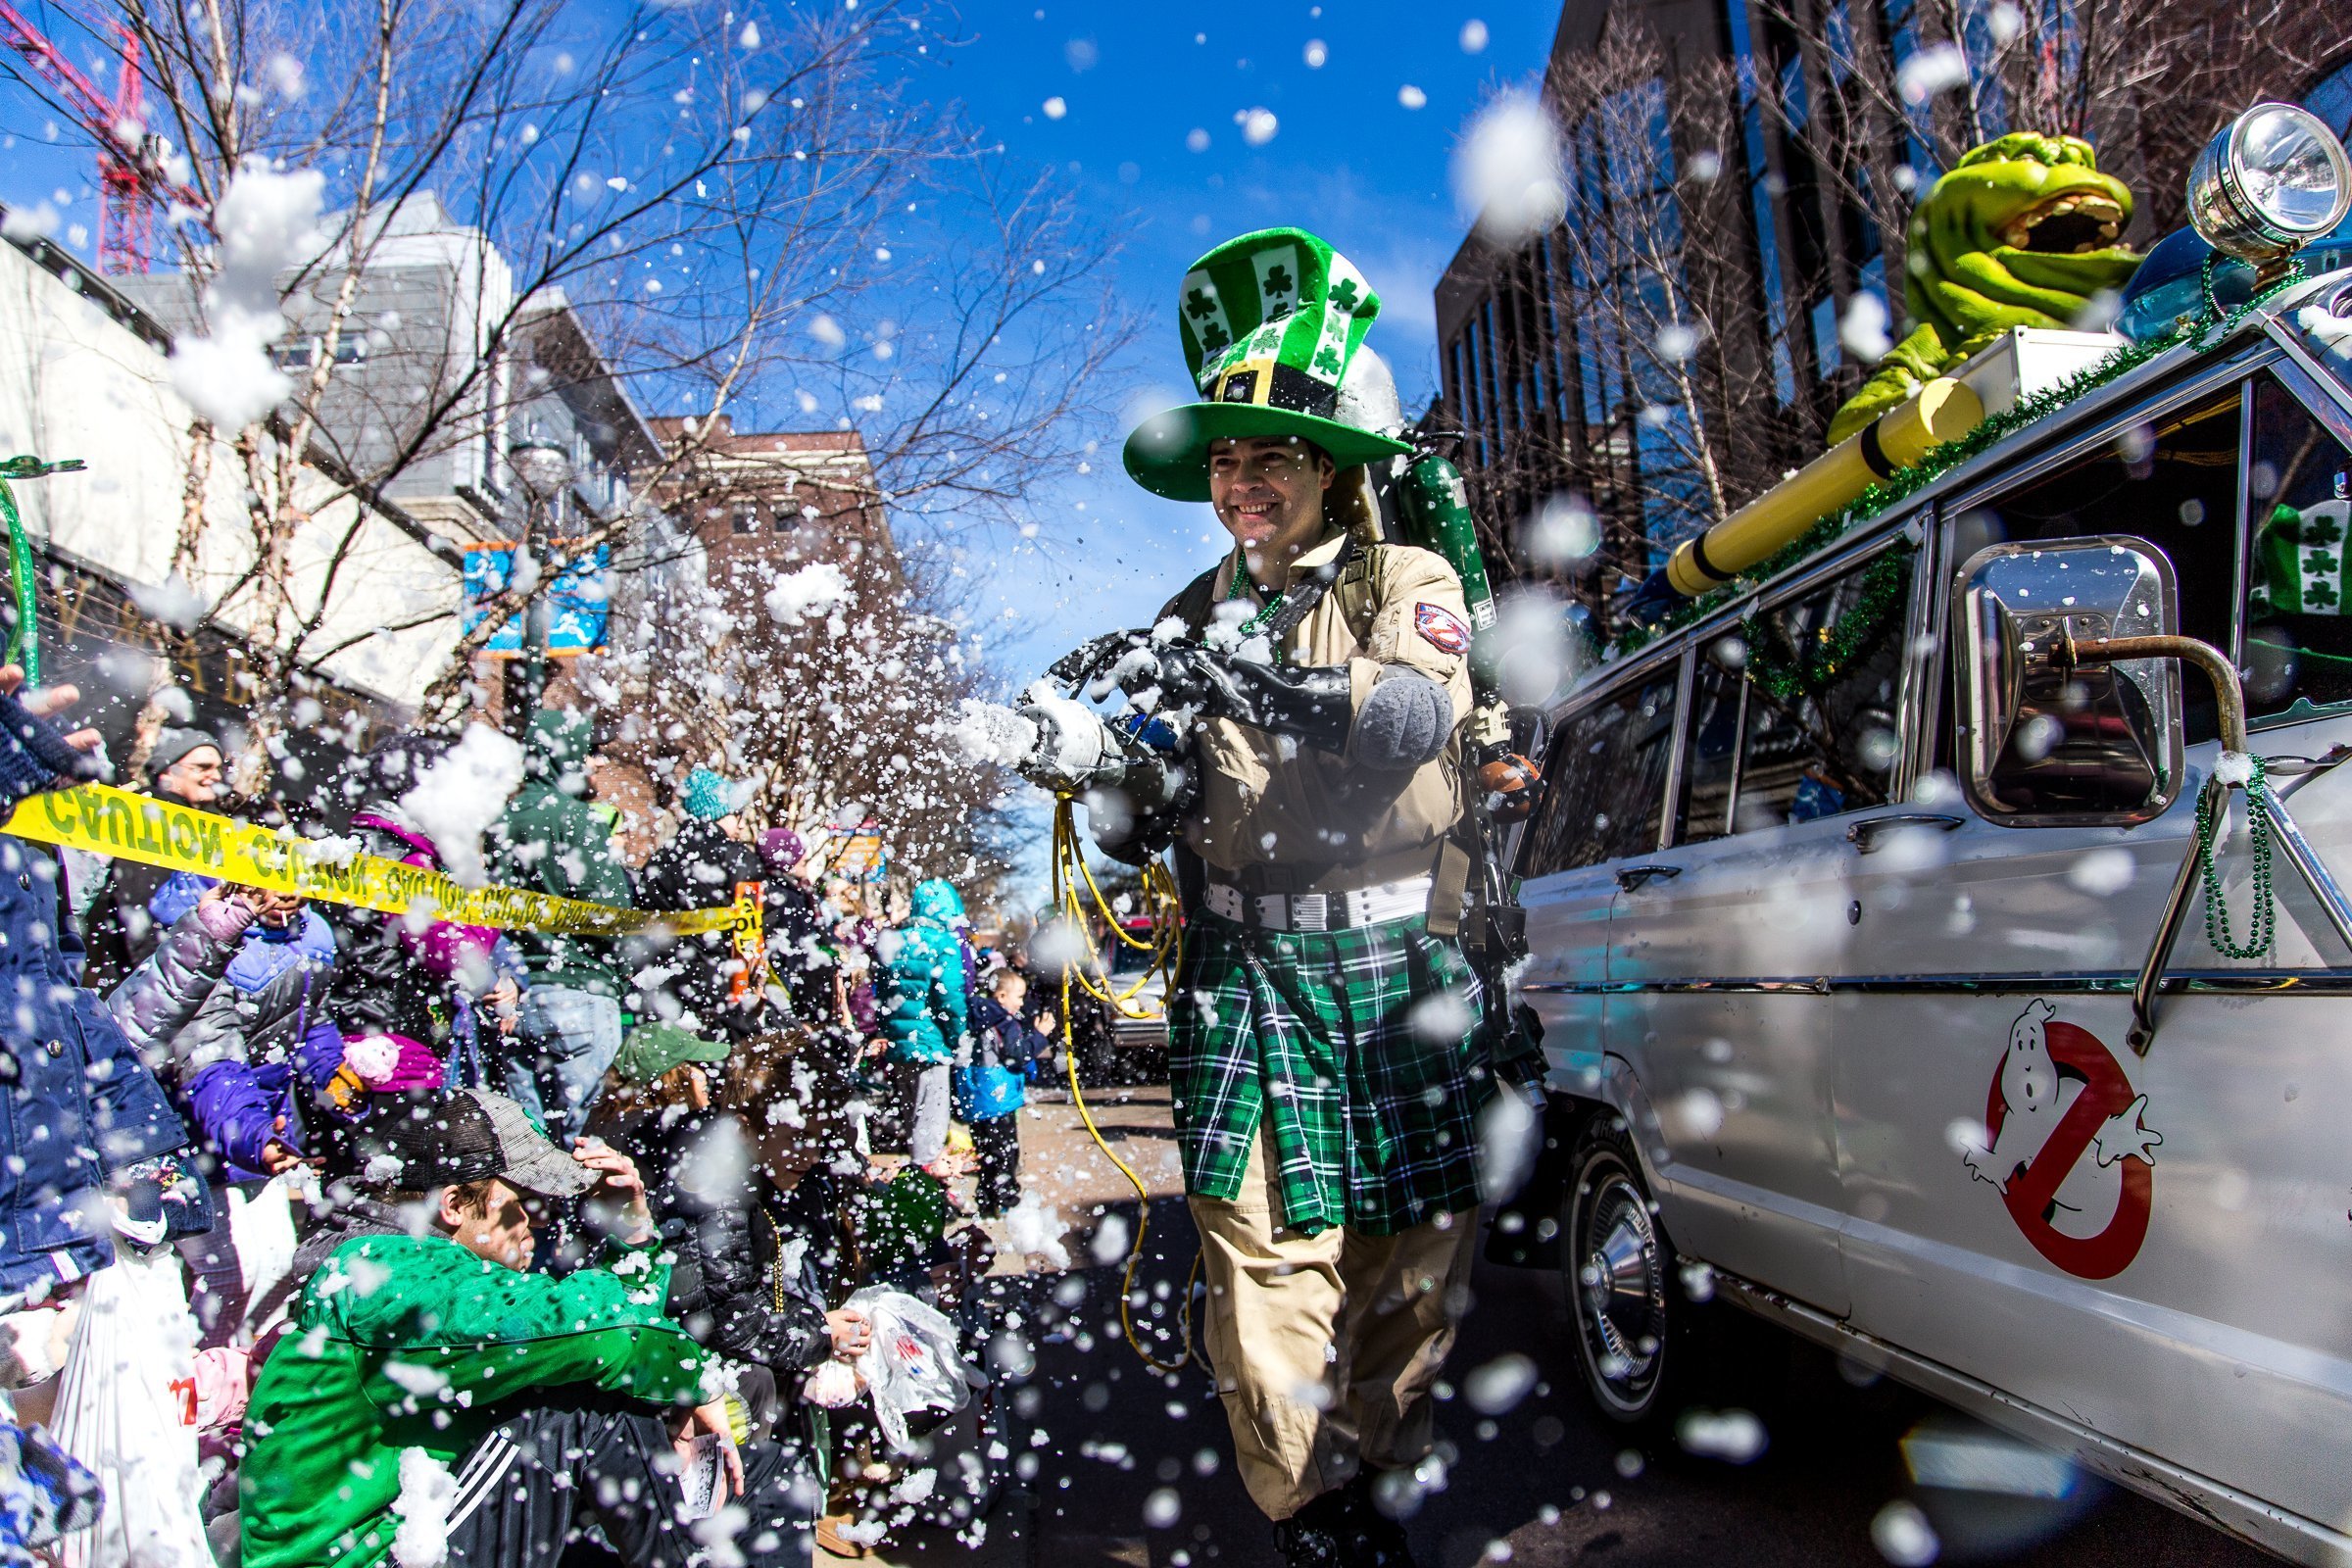 A participant dressed as a Ghostbuster in a kilt and leprechaun hat sprays the crowd with foam during the 18th annual St. Patrick's Day Parade in Kalamazoo, Mich., on Saturday, March 17, 2018. (Rebekah Welch/Kalamazoo Gazette-MLive Media Group via AP)